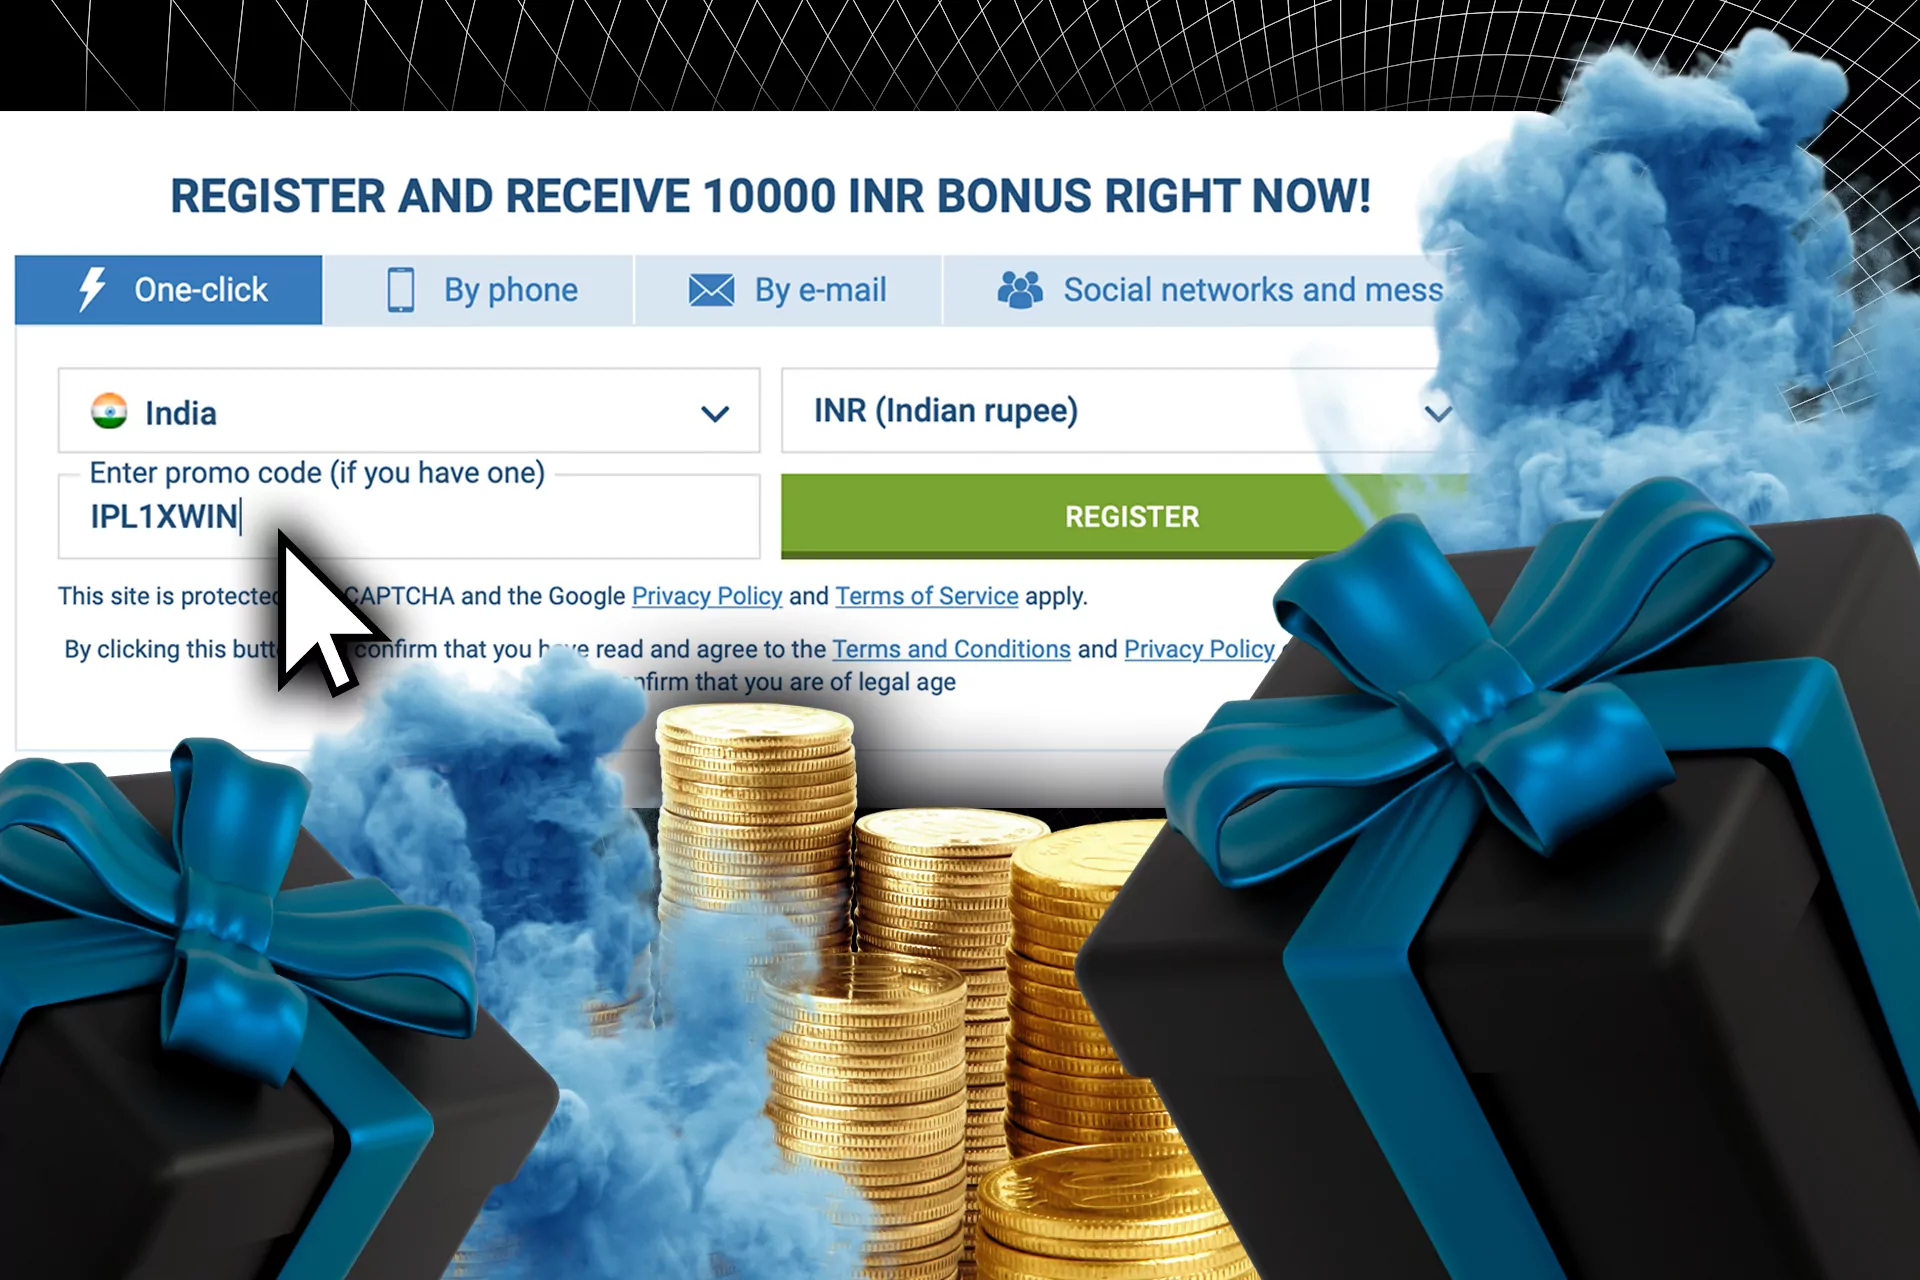 As a gift, we give you a special promo code for bettors and casino players that you should use during your next deposit.